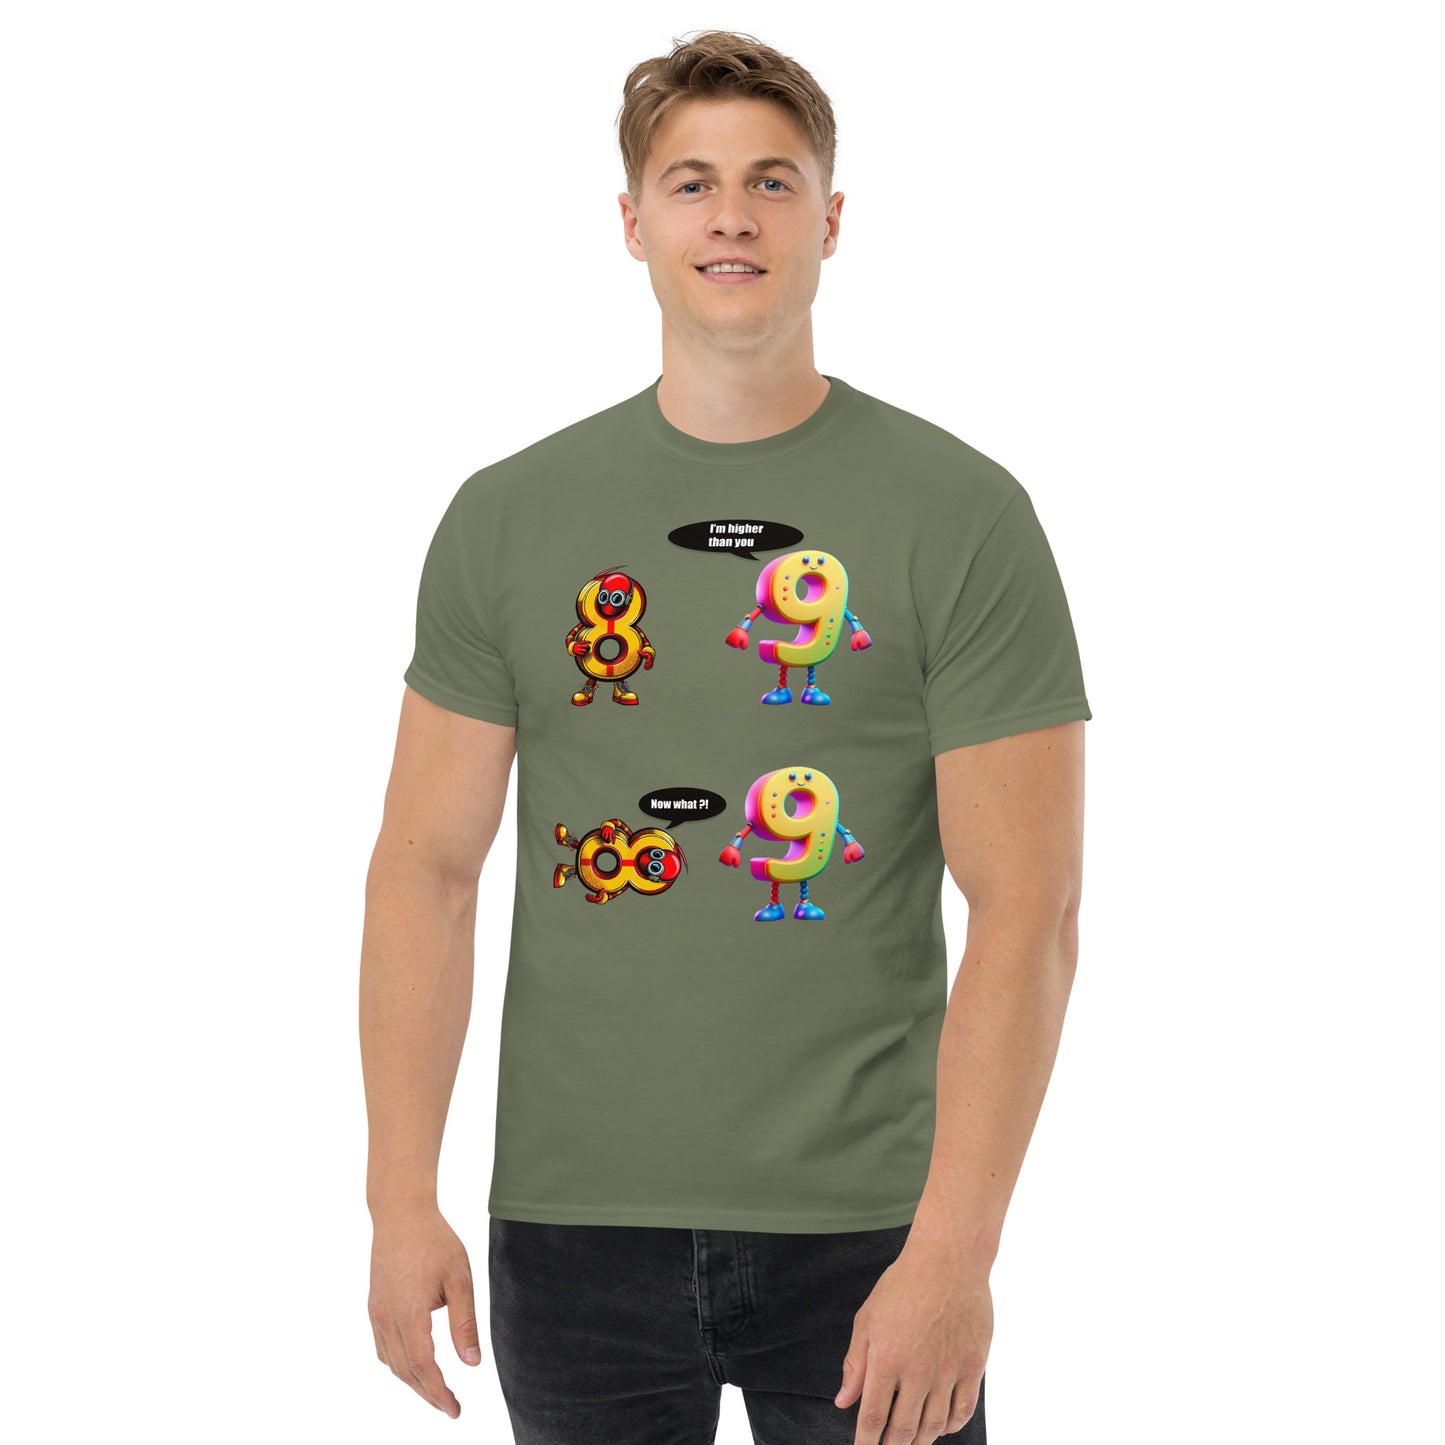 Man with military green t-shirt with picture of 8 and 9 having a discussion 